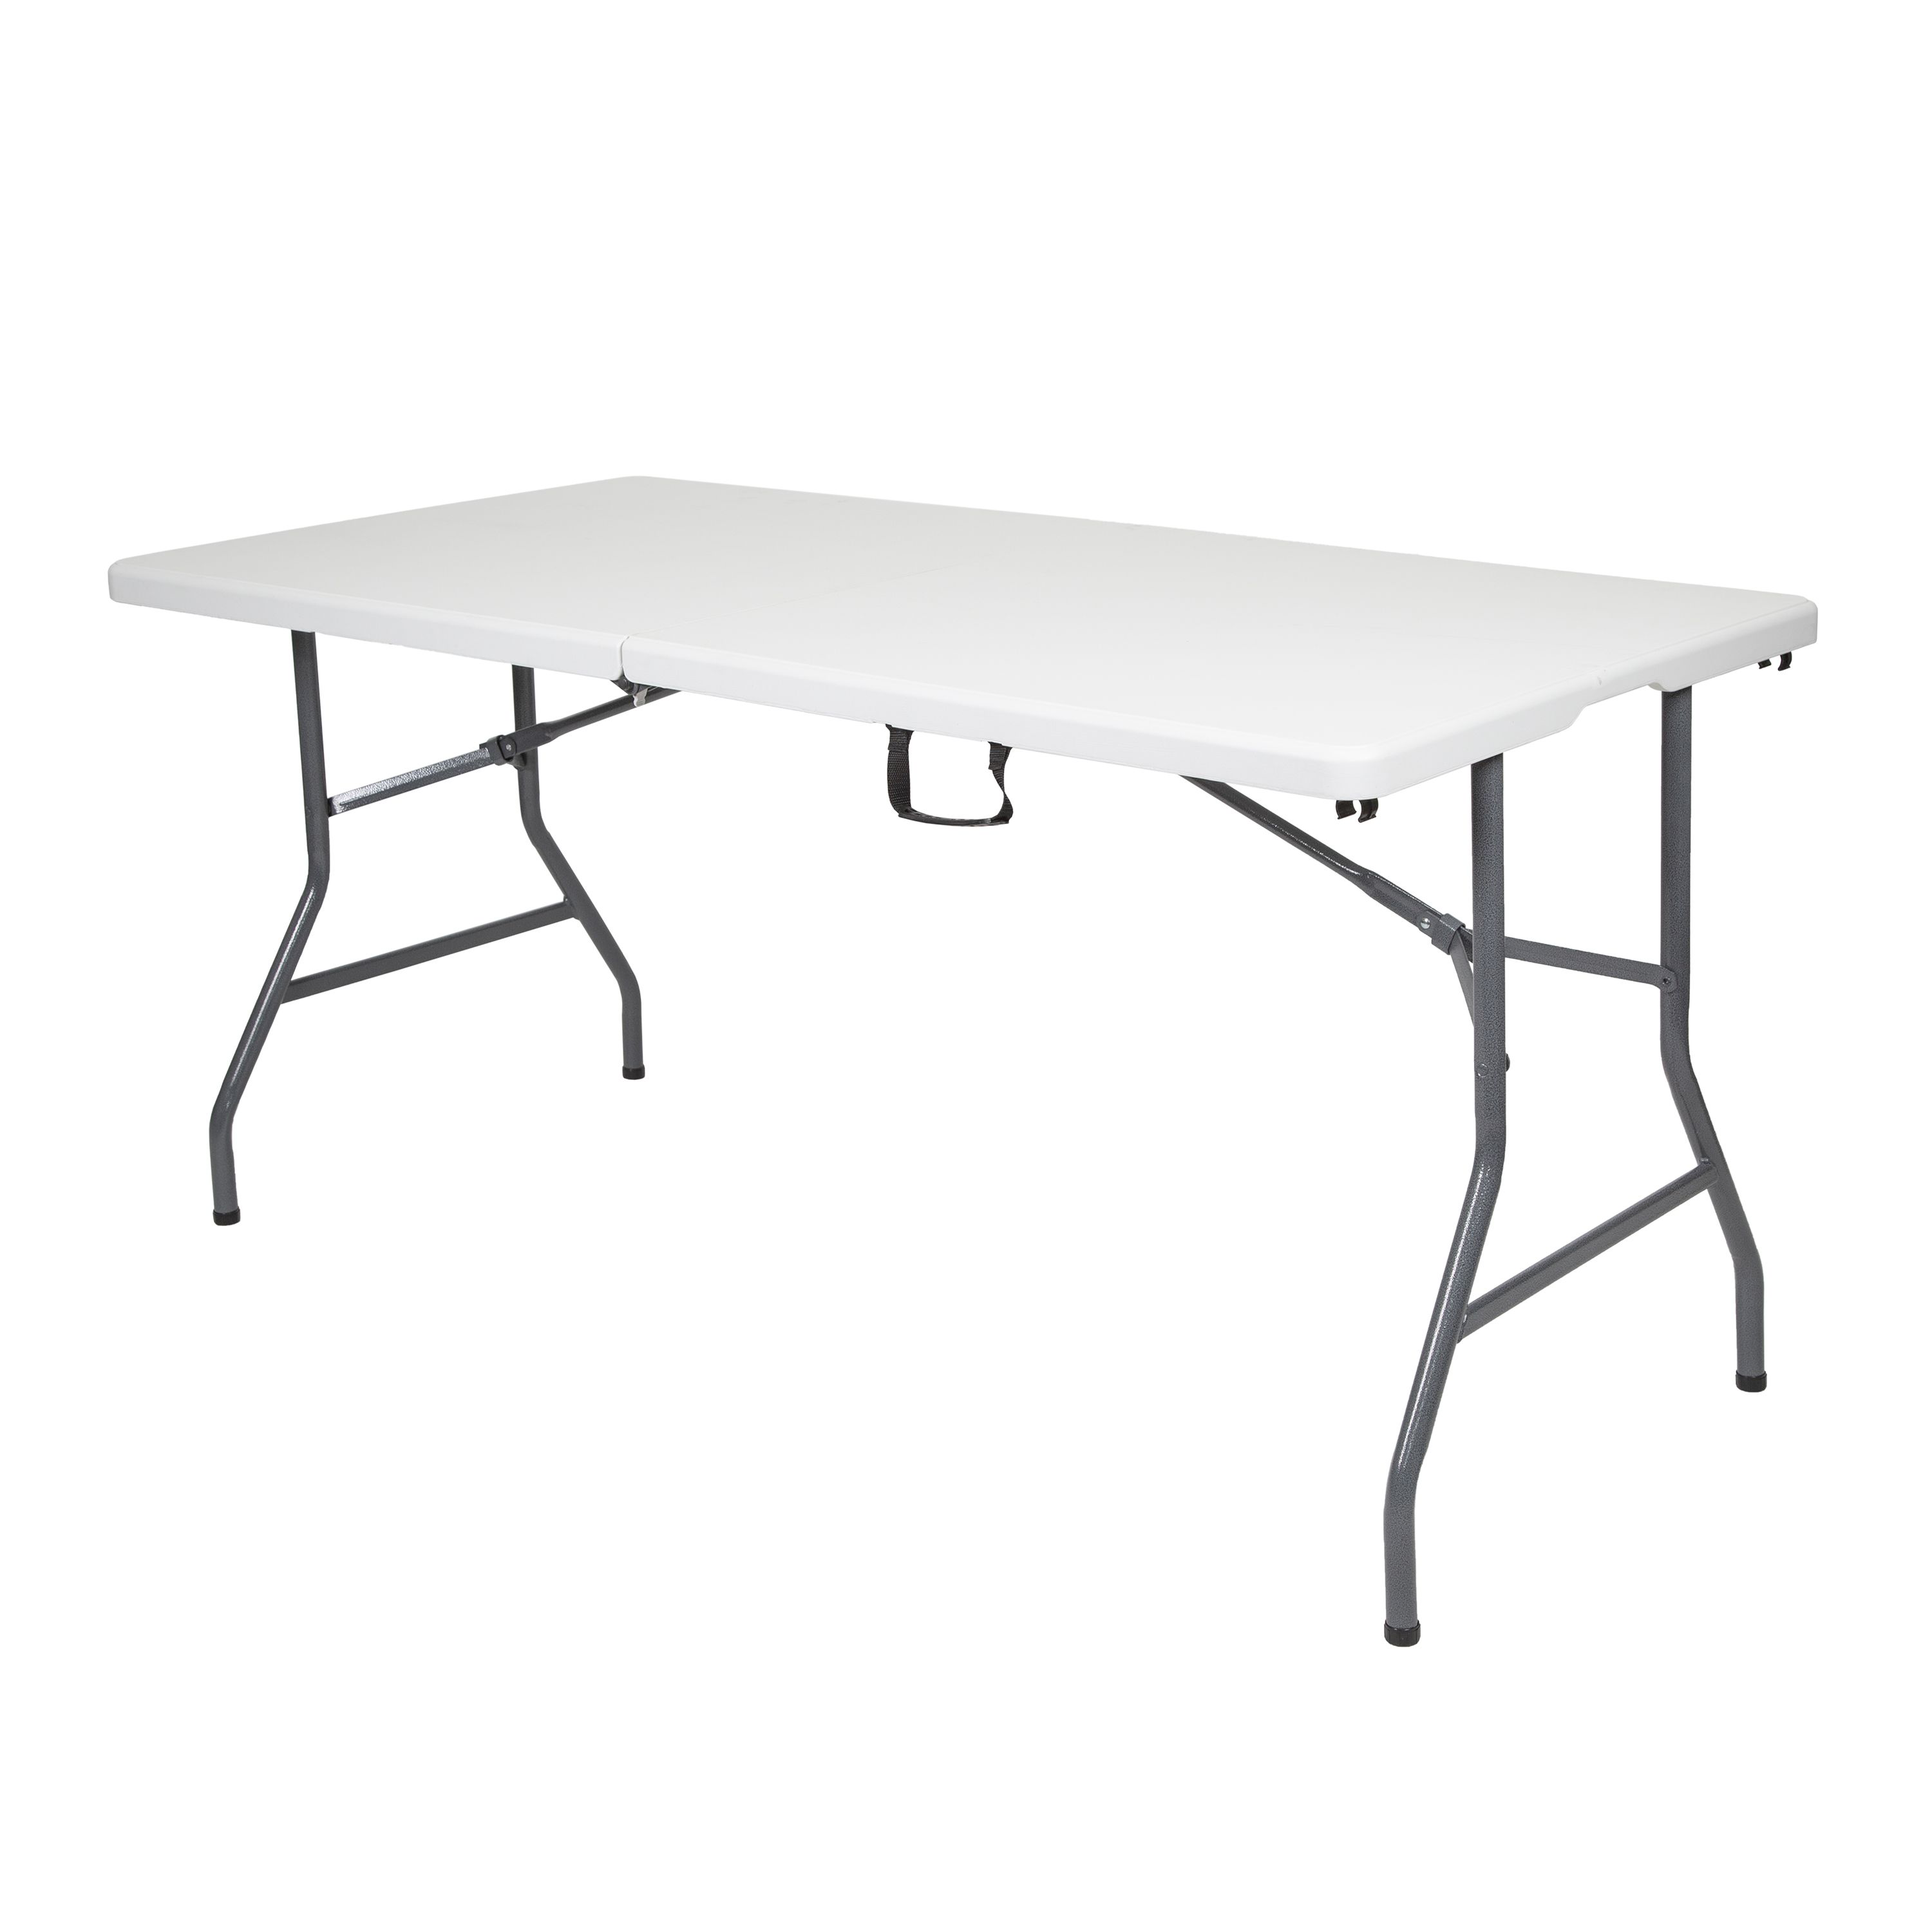 Stansport Folding Camp Table | Bass Pro Shops